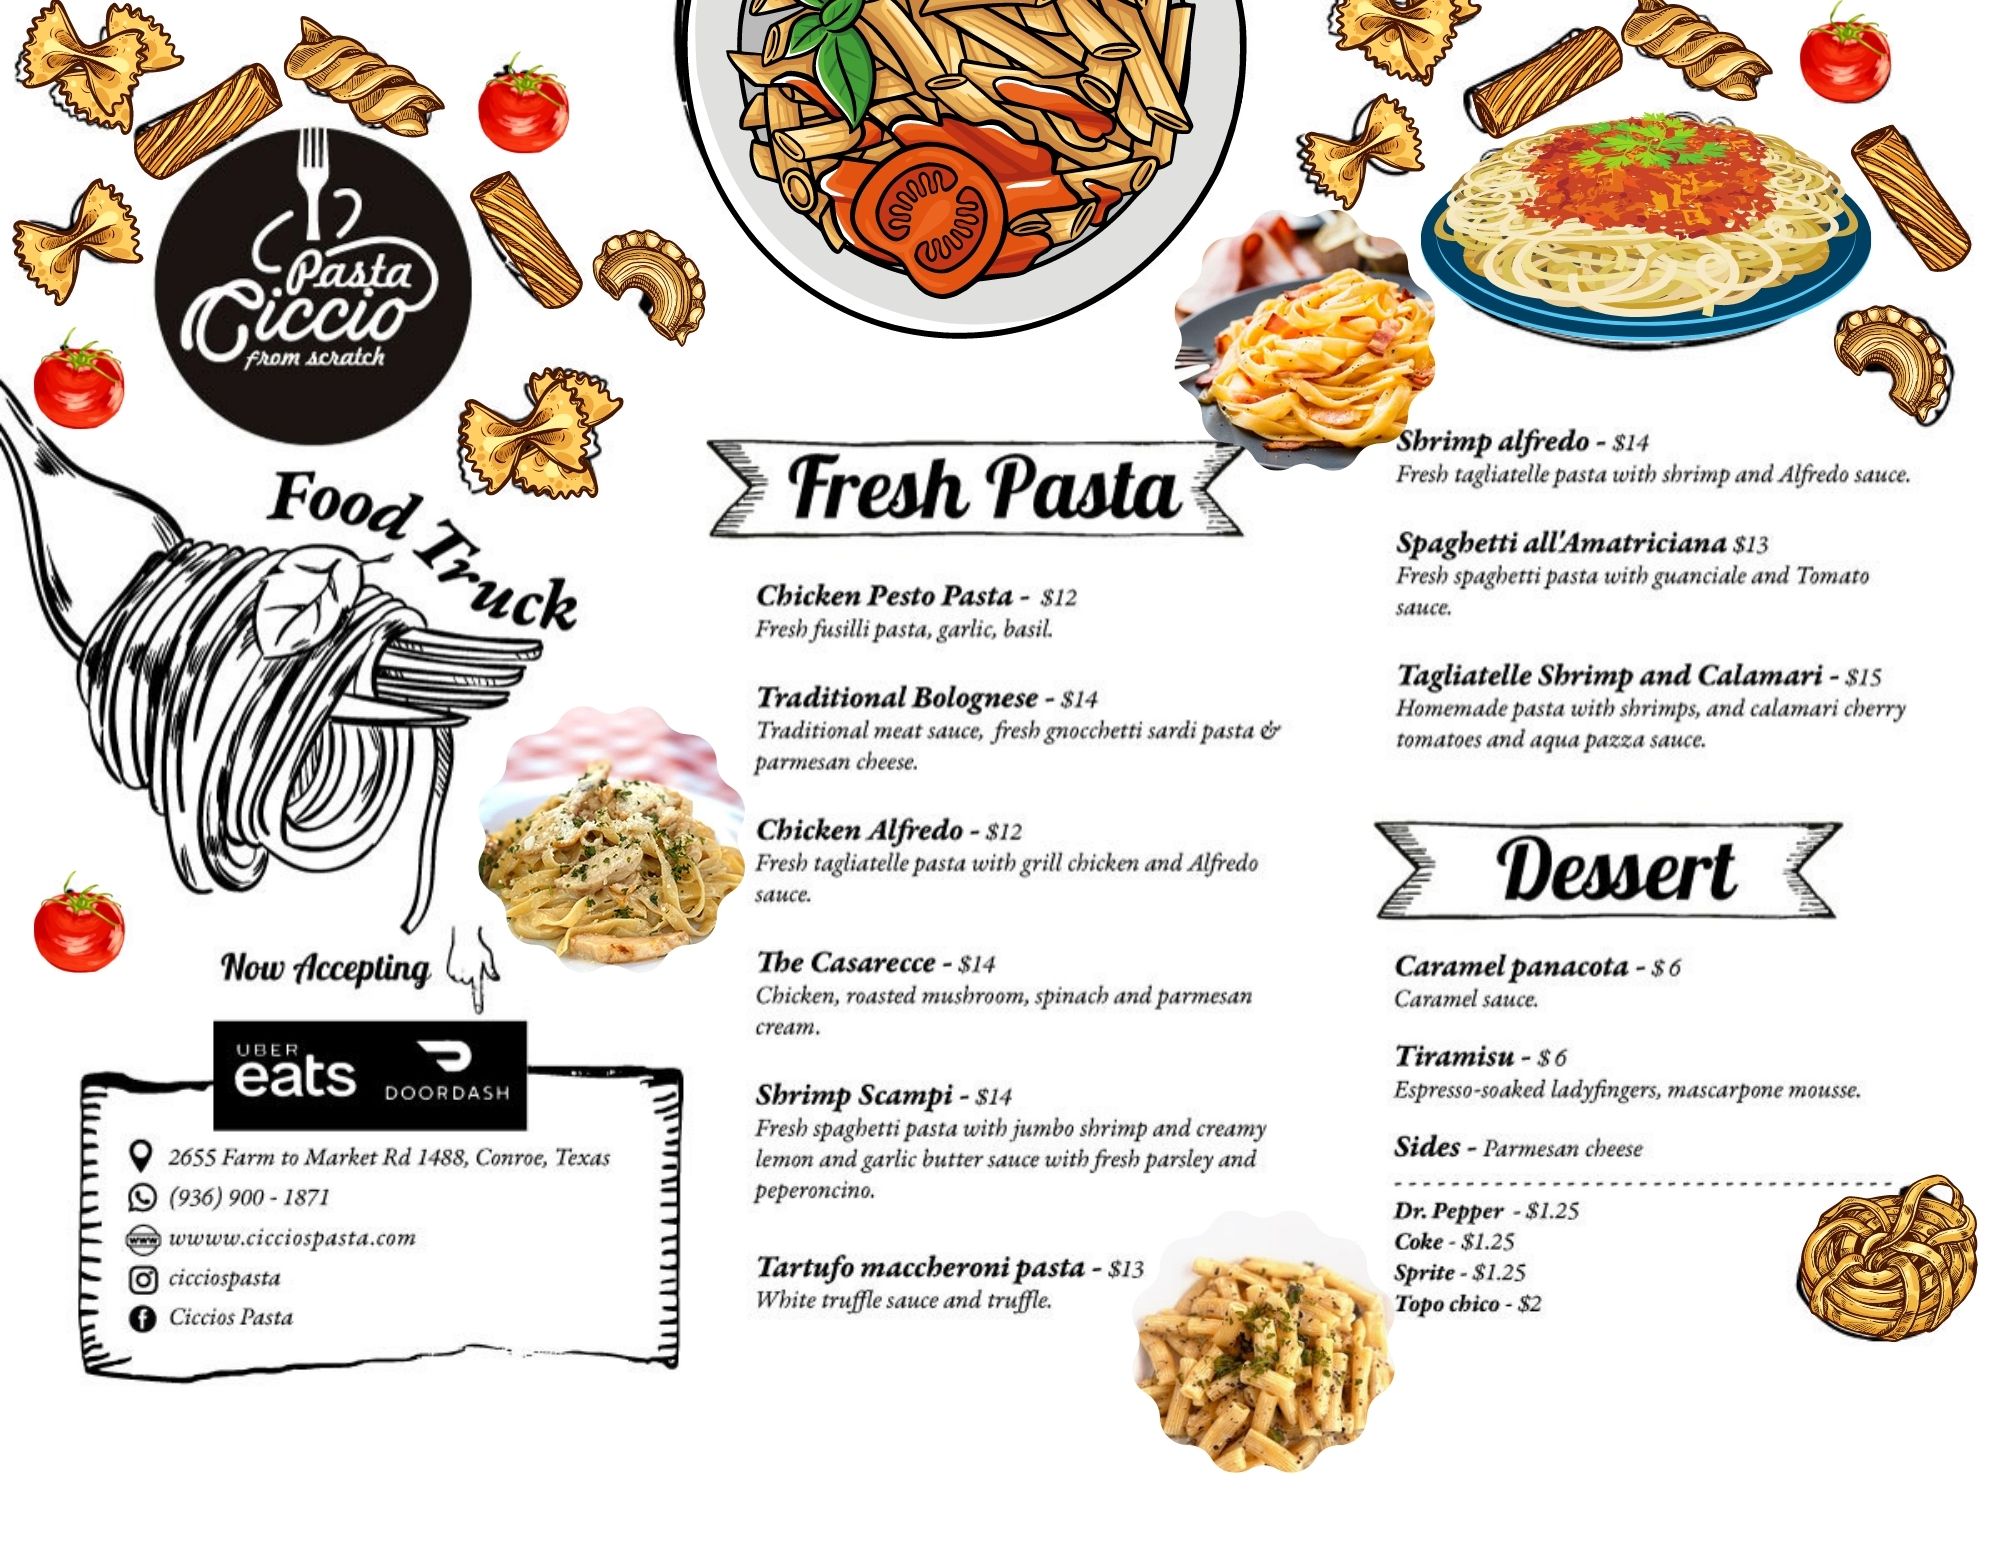 A restaurant menu featuring a variety of pasta dishes and other delectable food items.